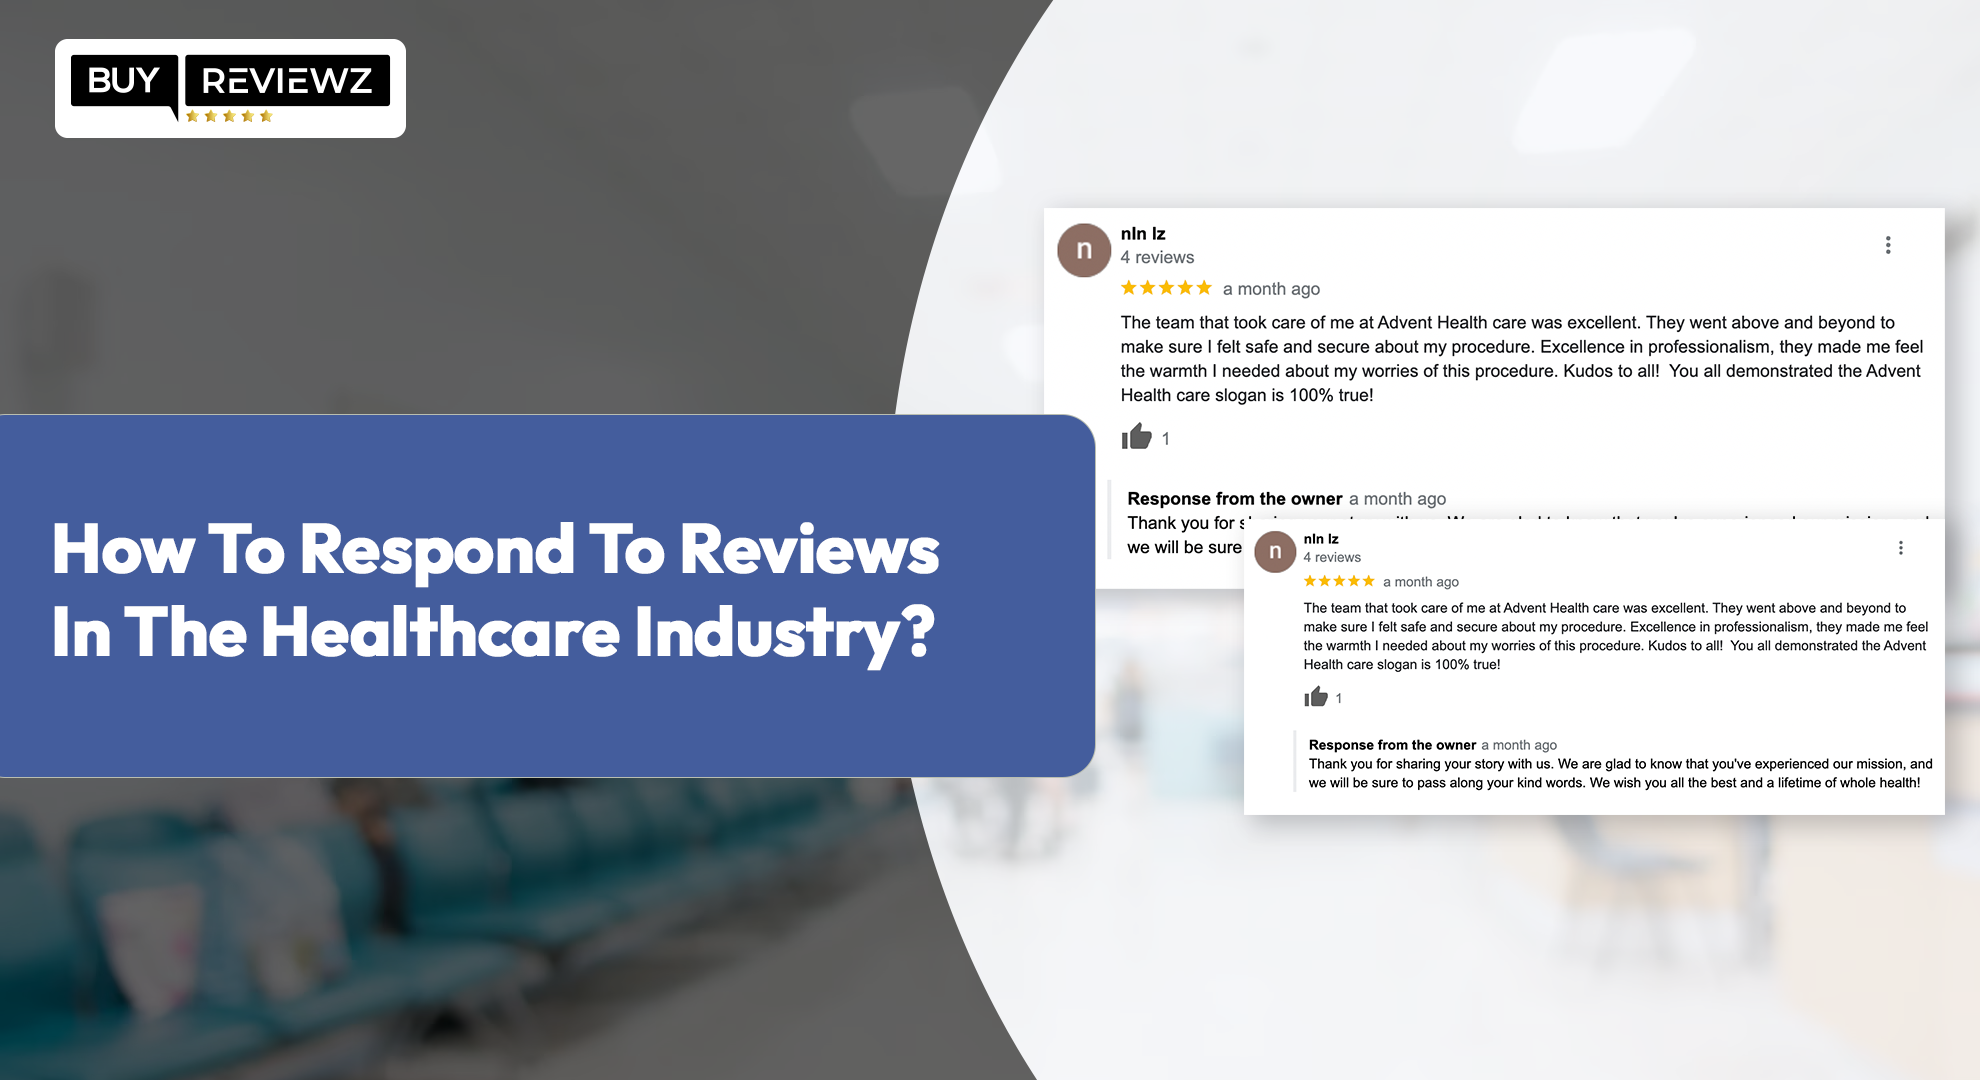 How To Respond Reviews in Healthcare Industry